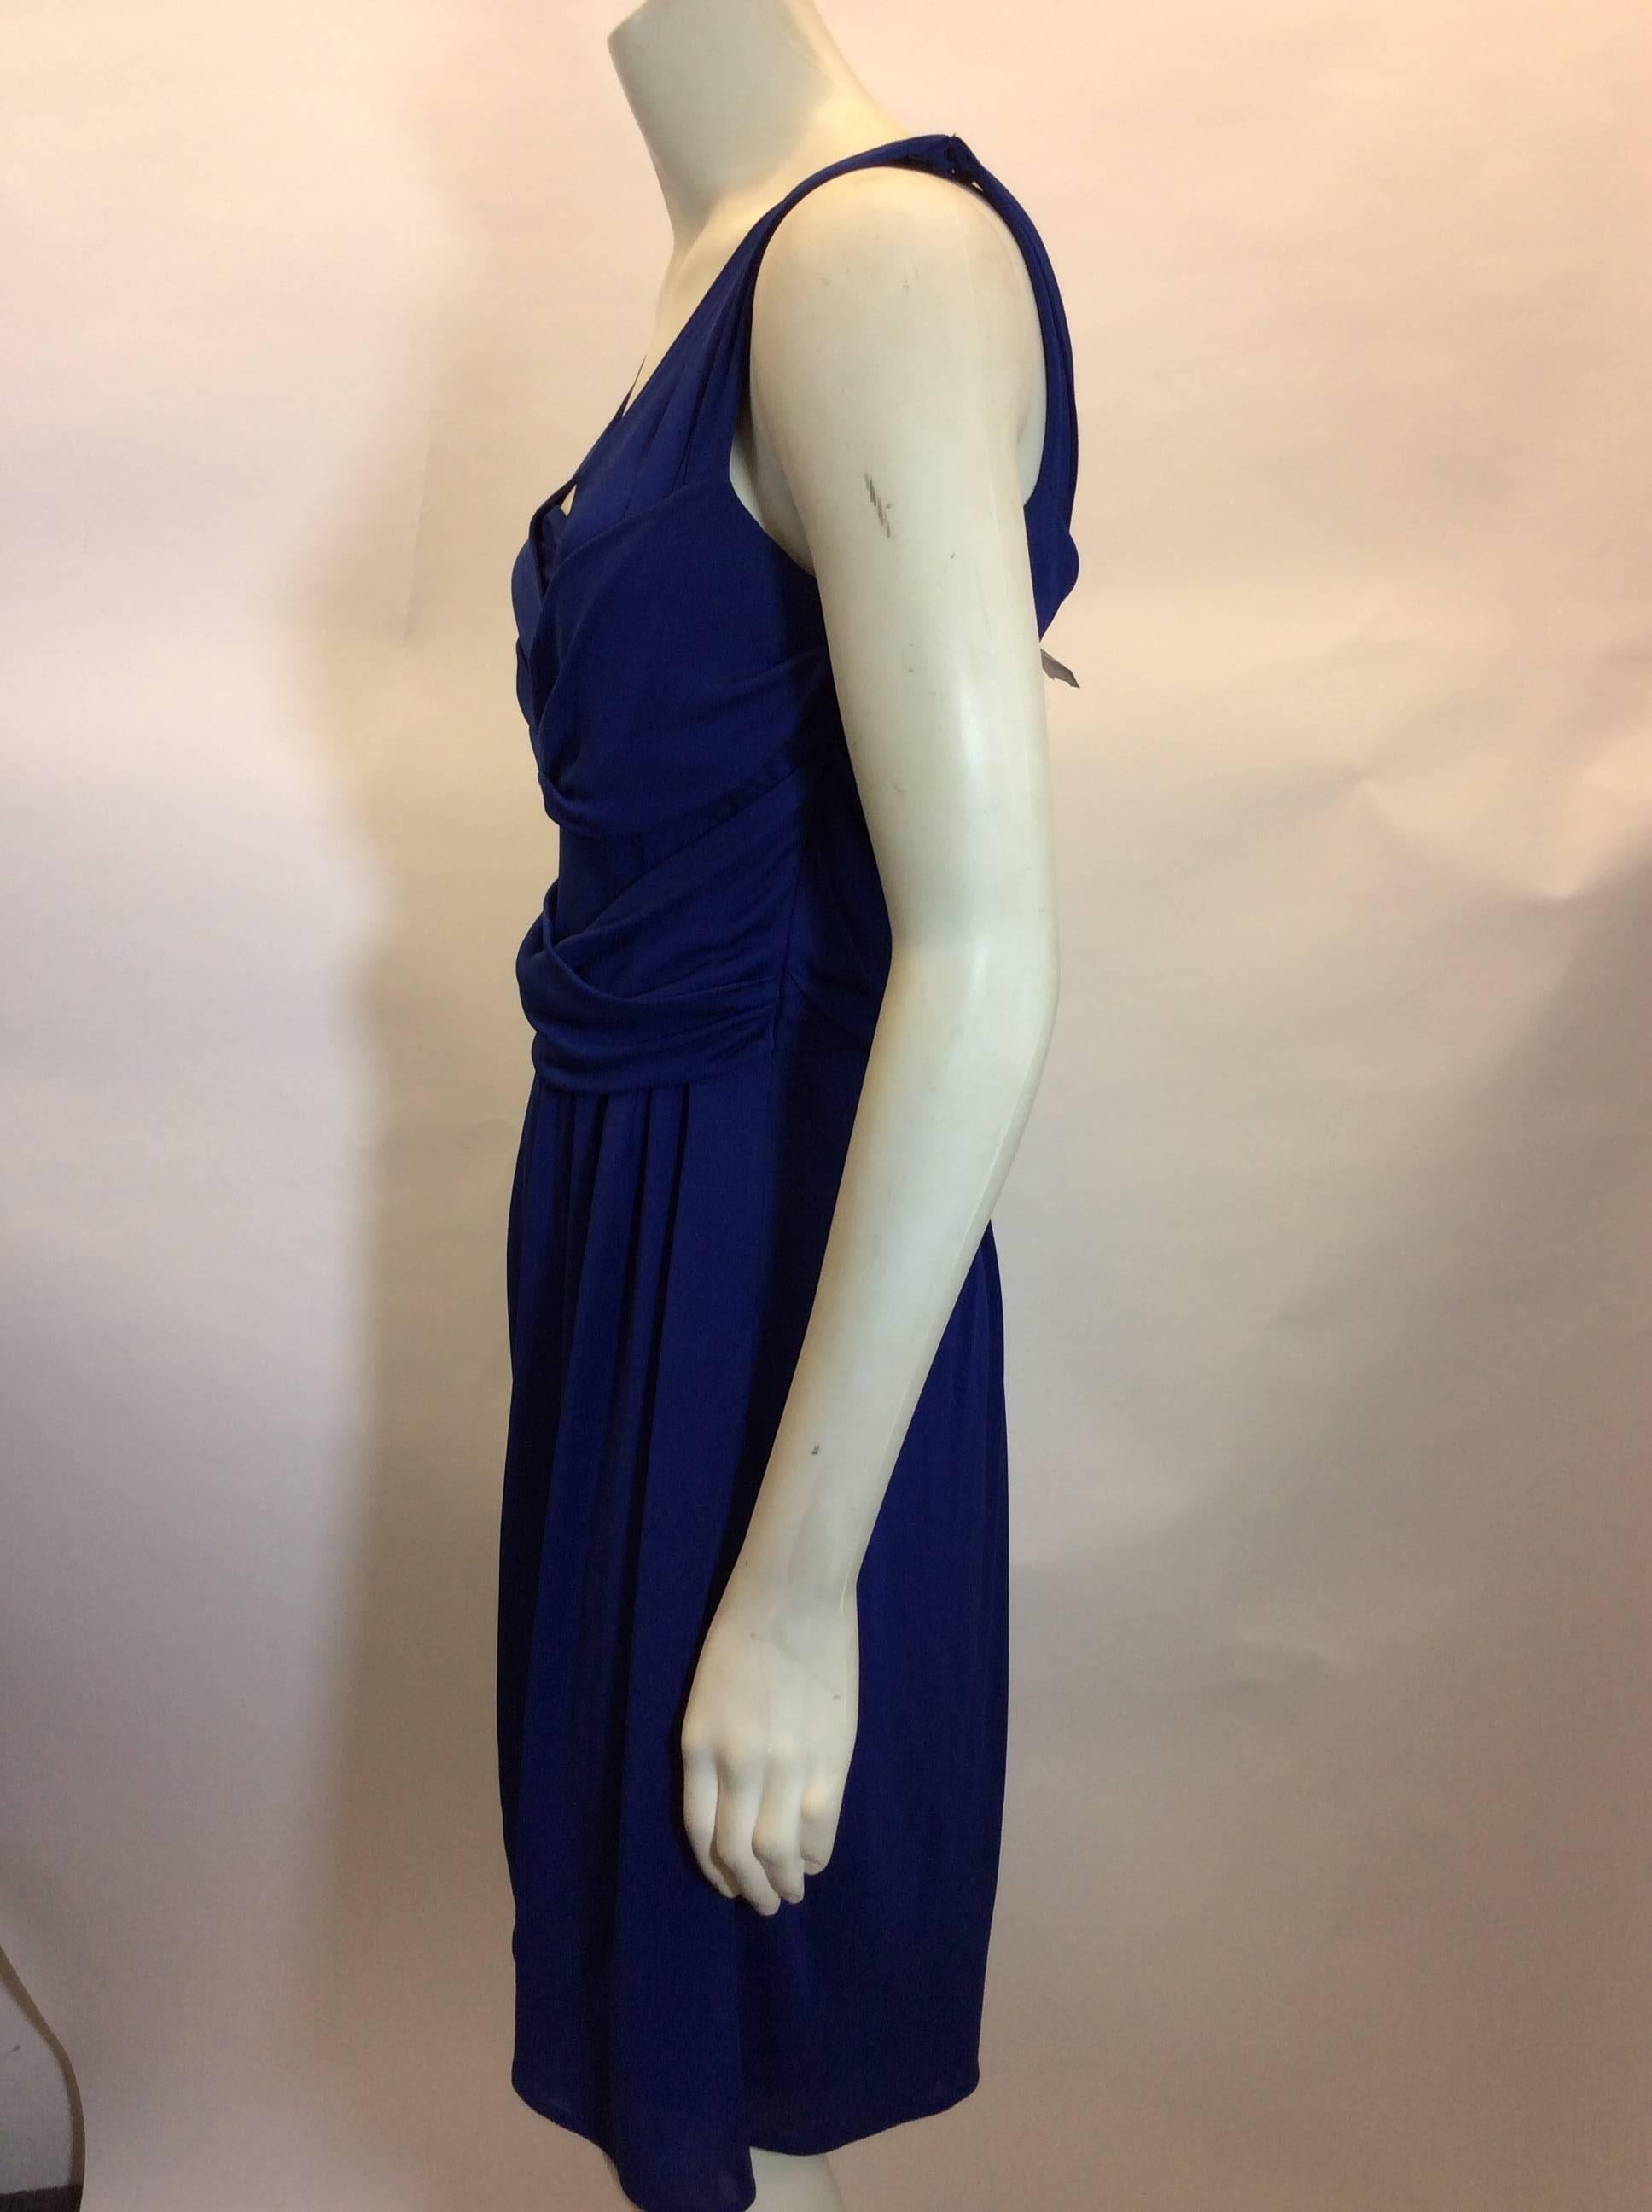 Moschino Sleeveless Royal Blue Dress In Excellent Condition For Sale In Narberth, PA